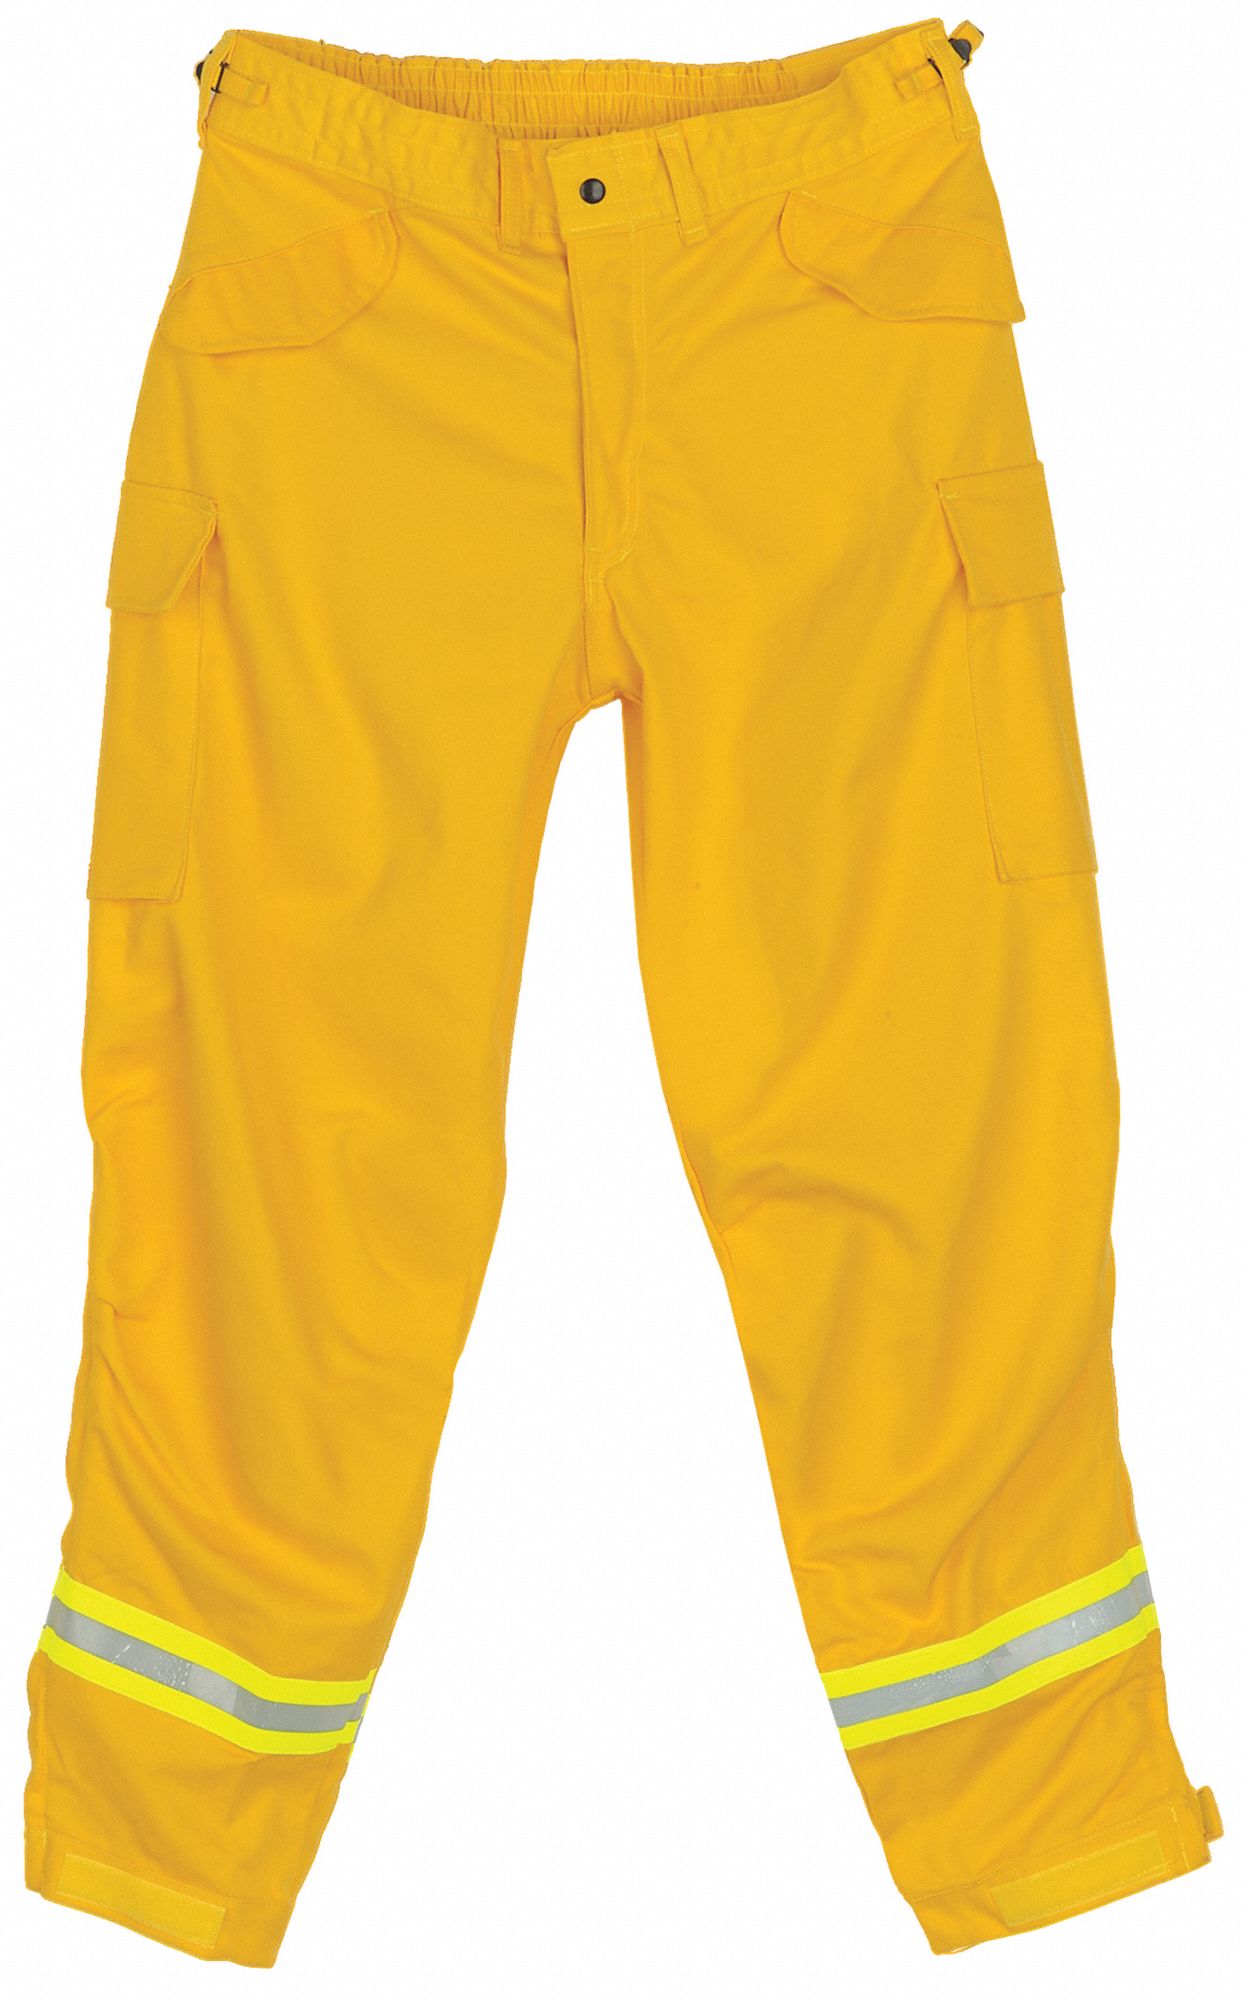 Wildland Fire Over Pants: XL, 39 to 43 in Fits Waist Size, 30 in Inseam, Yellow